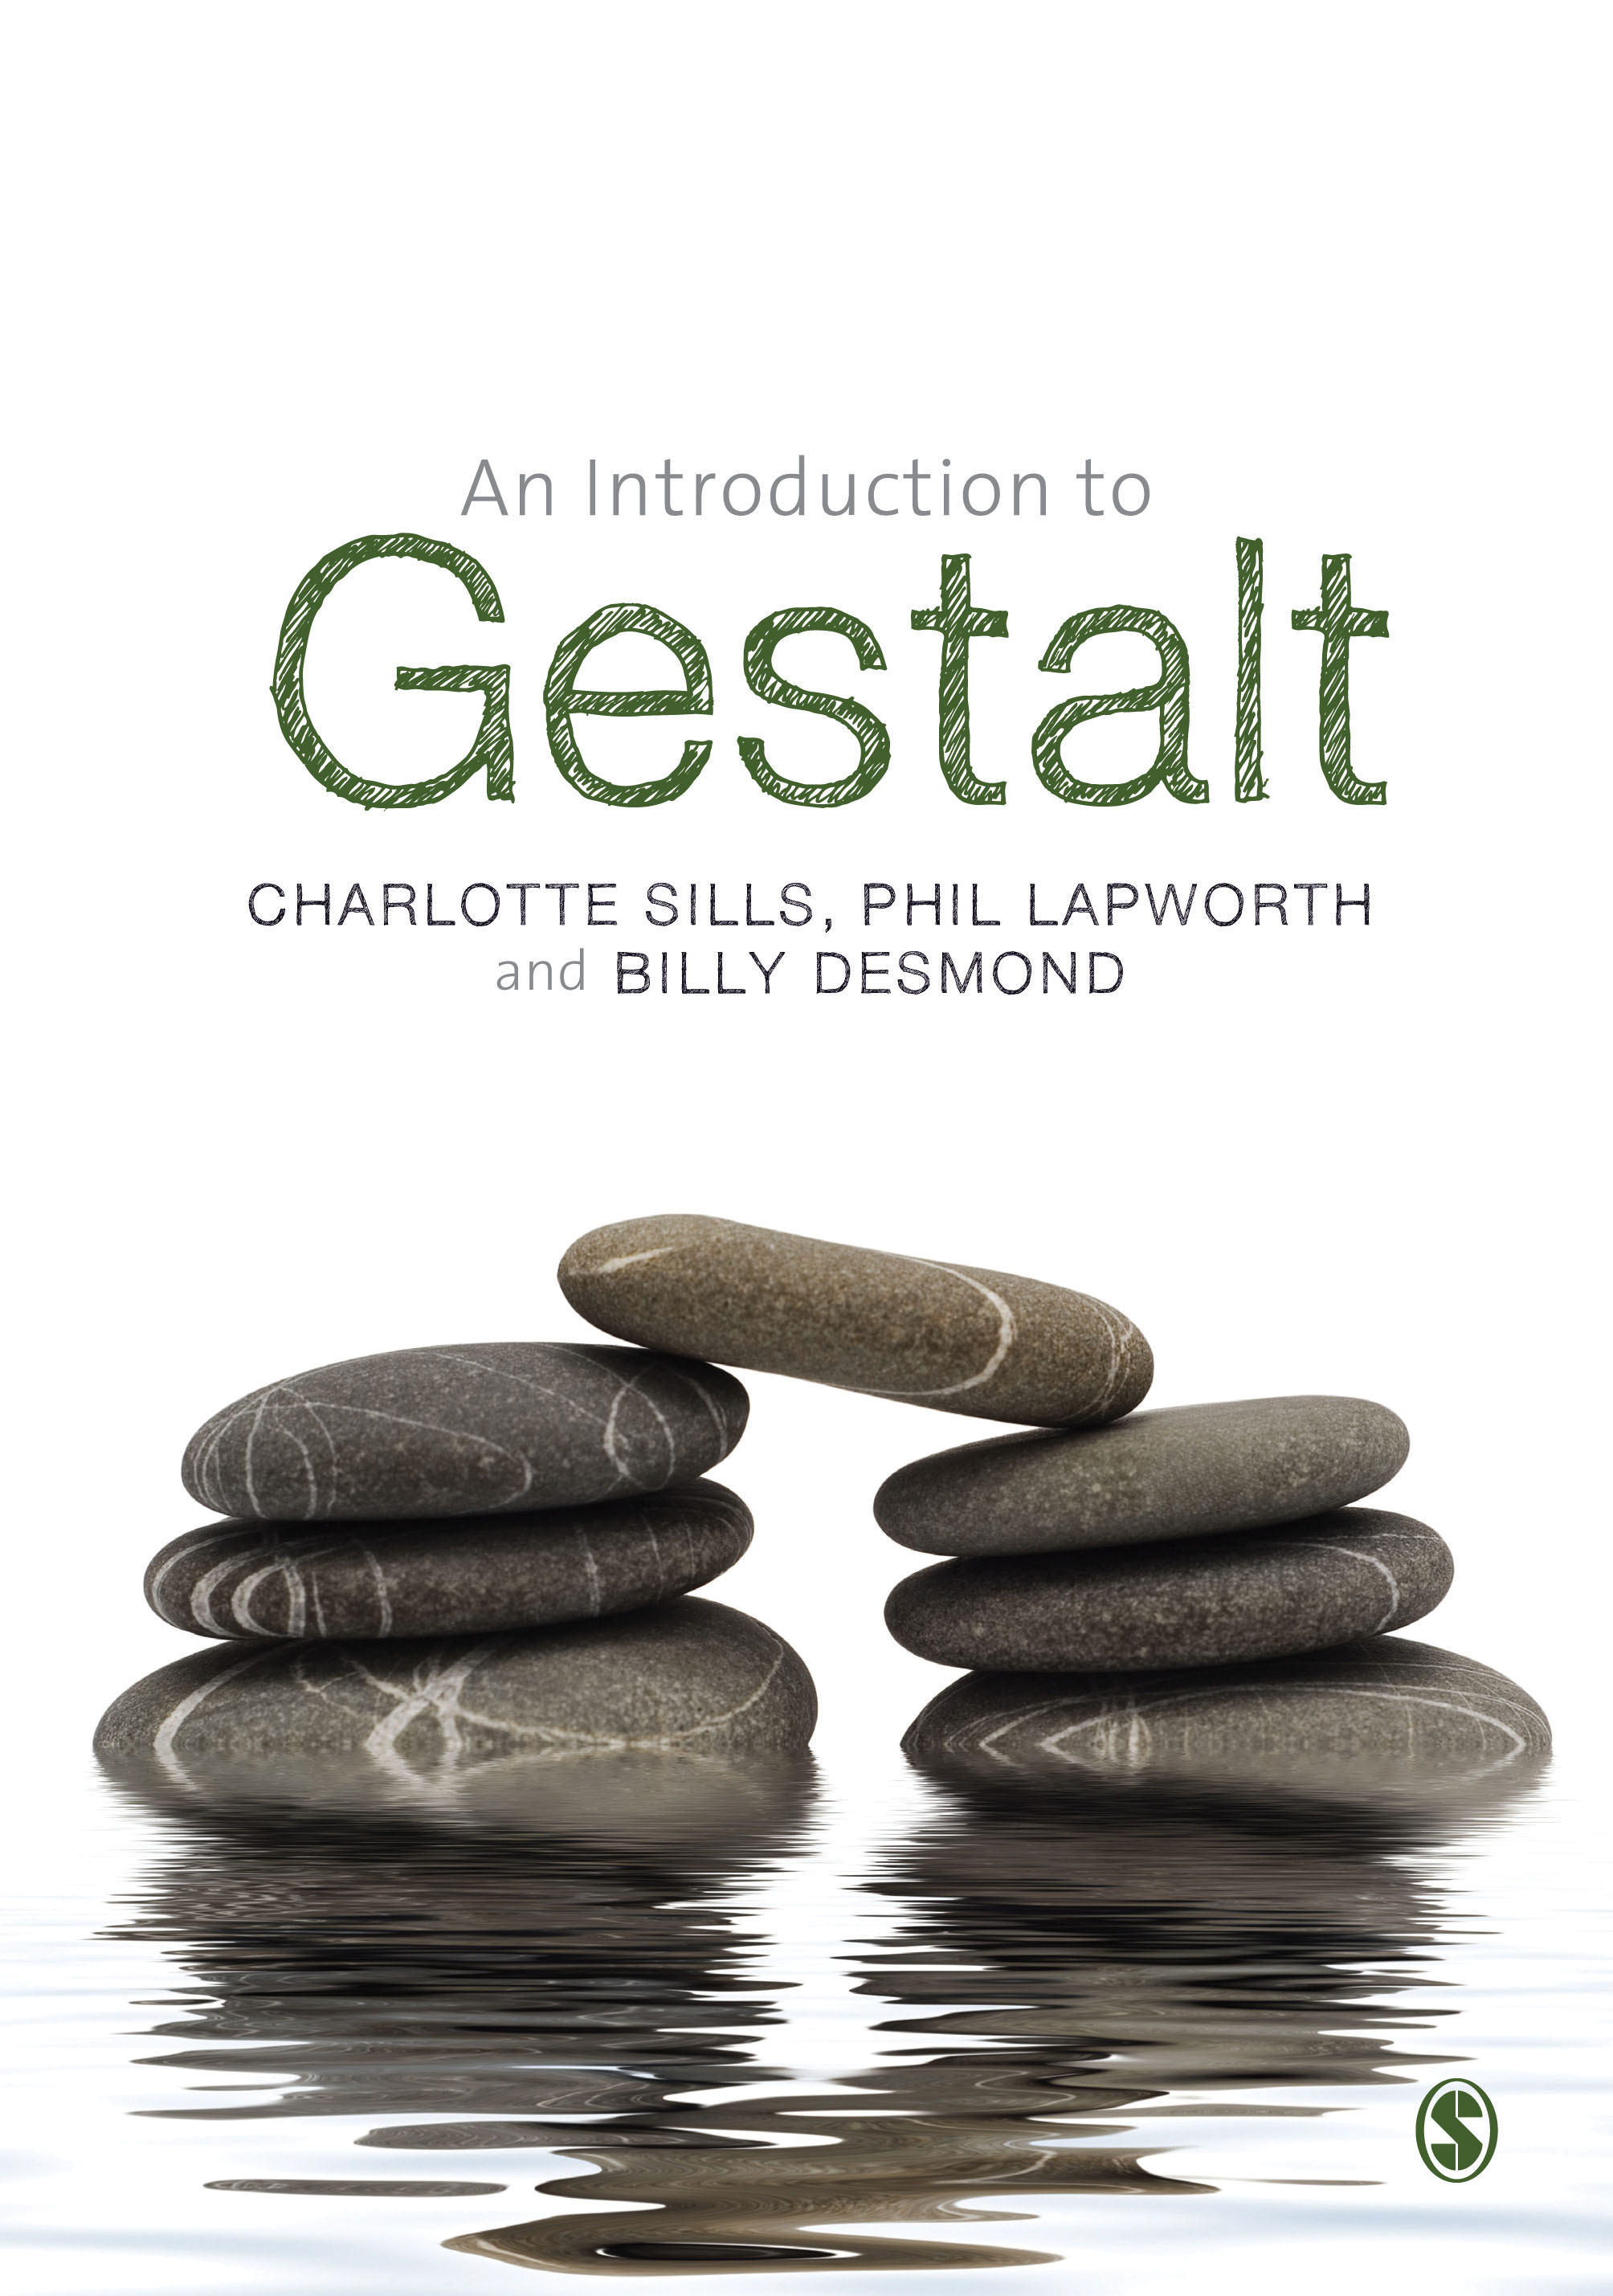 An Introduction to Gestalt book cover image 